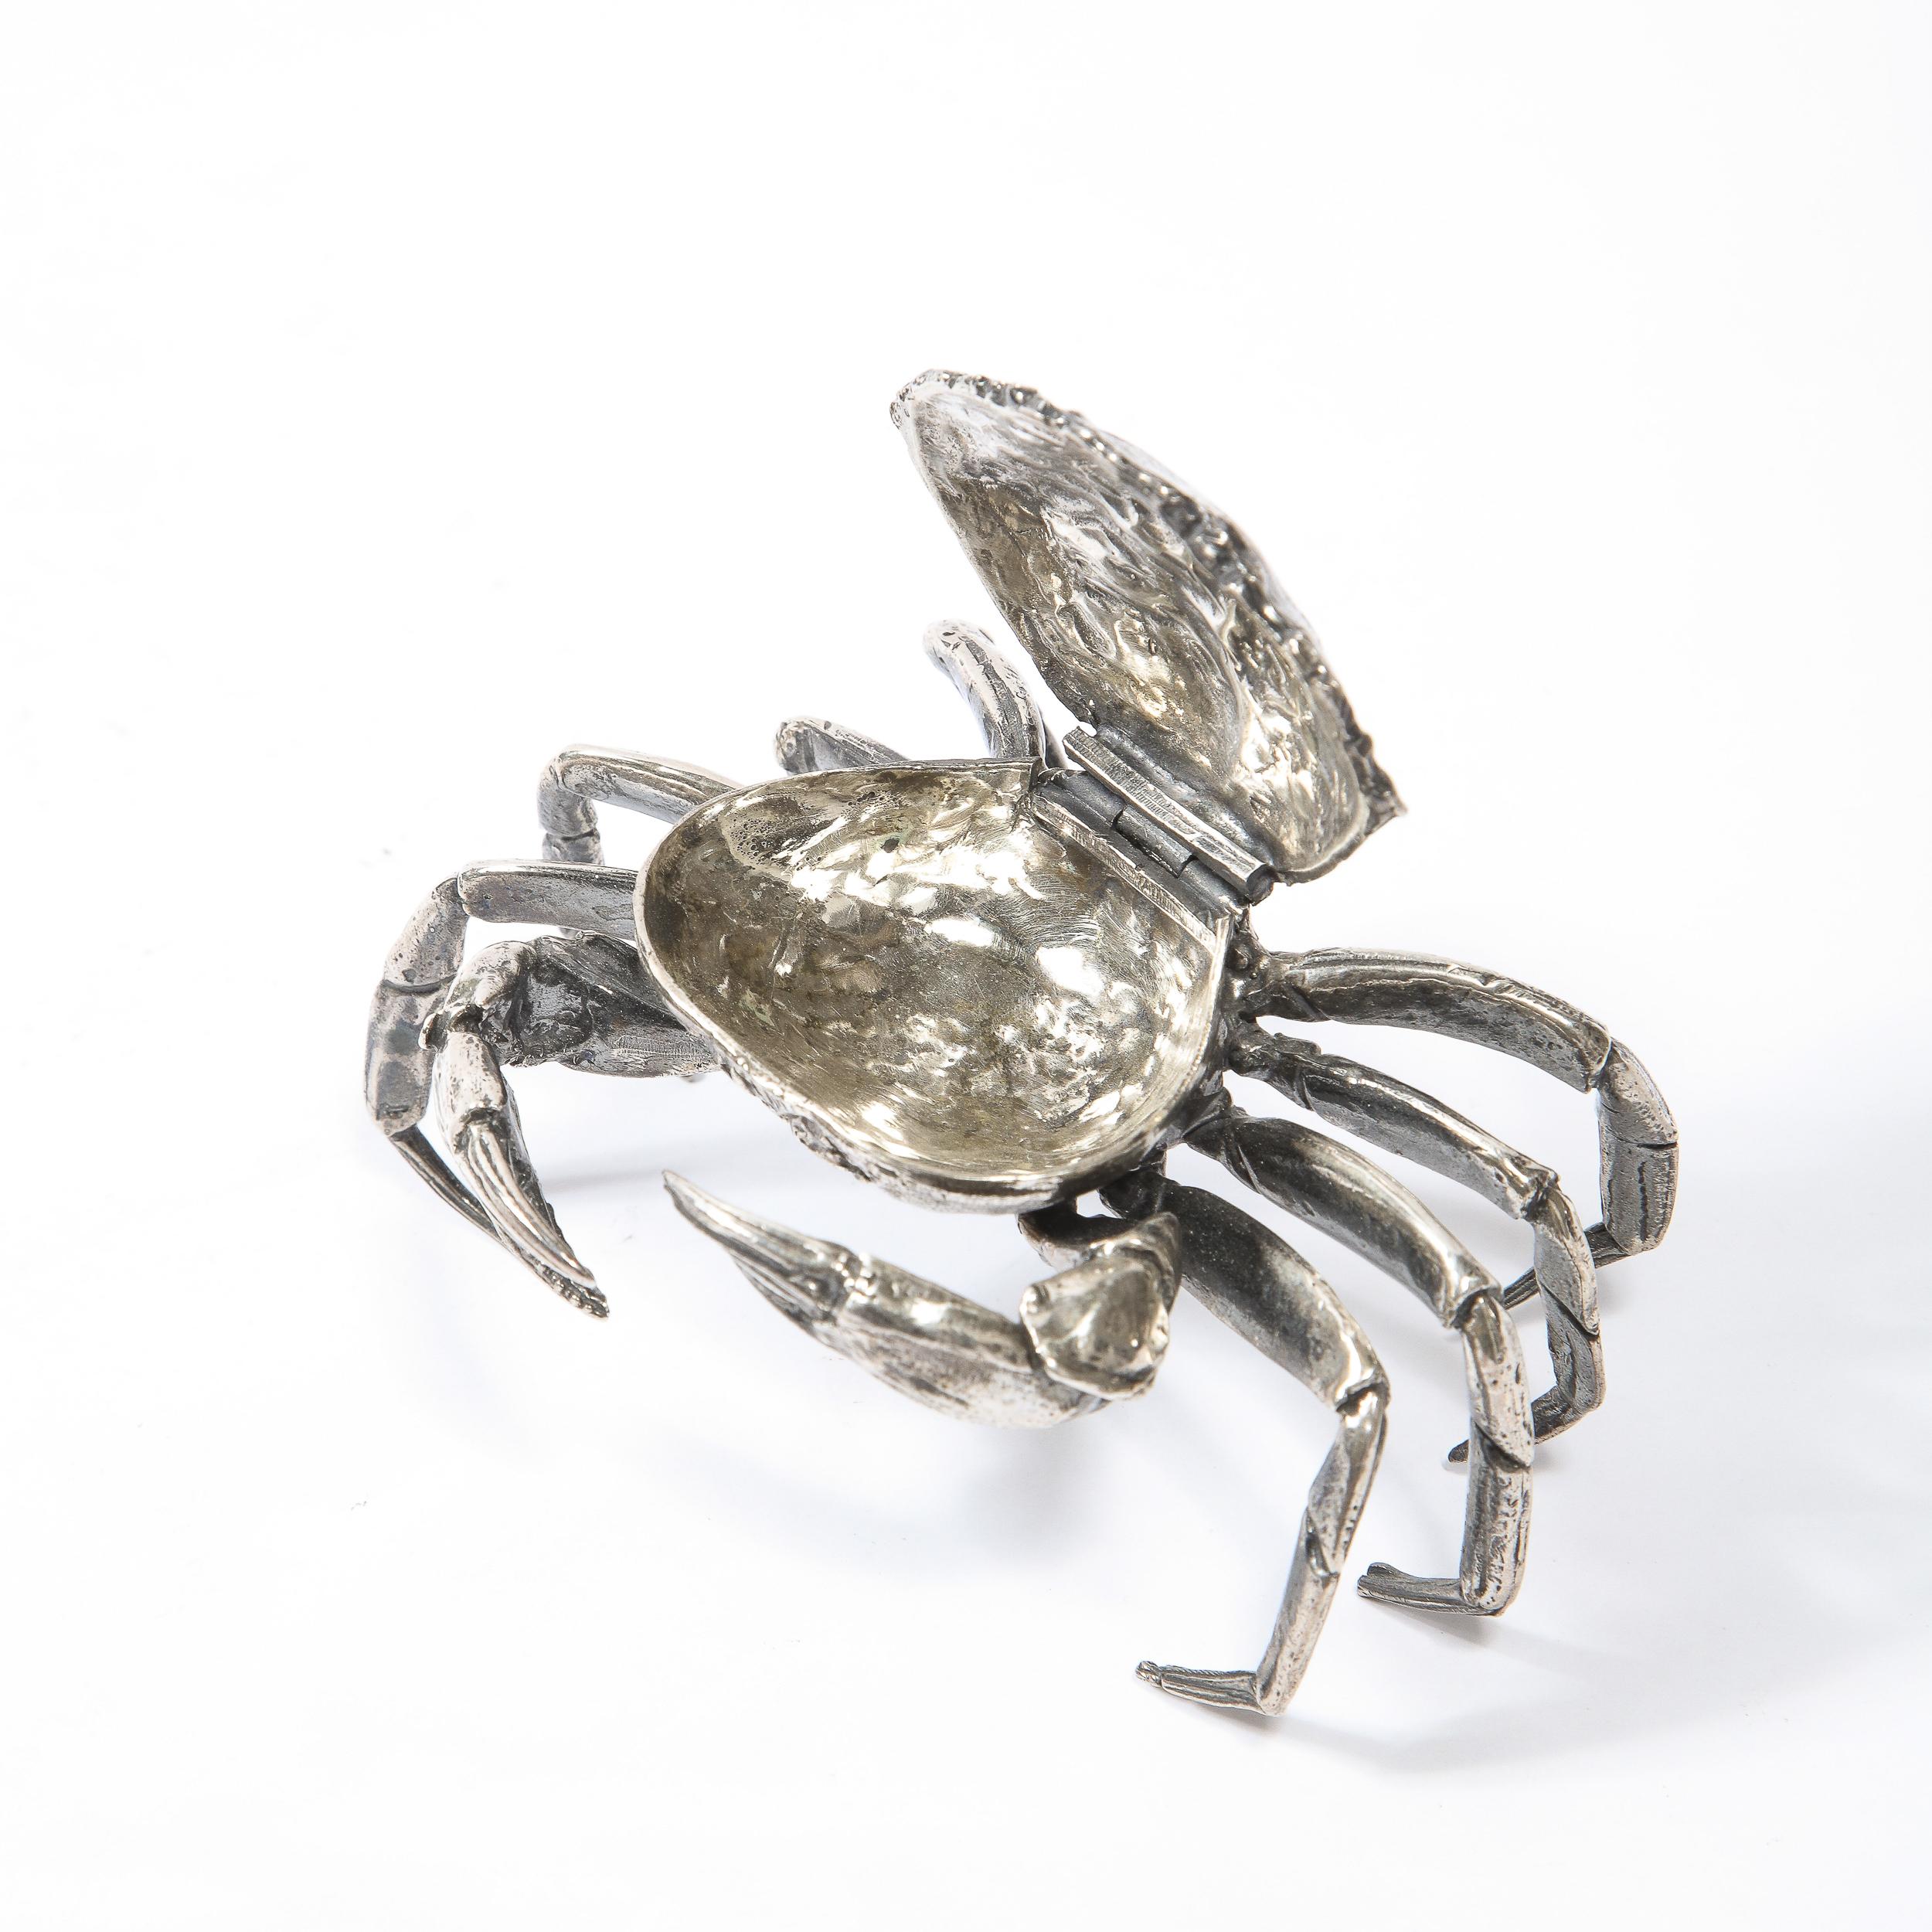 Pair of Modernist Sterling Silver Hand Wrought Stylized Crab Salt Cellars 4